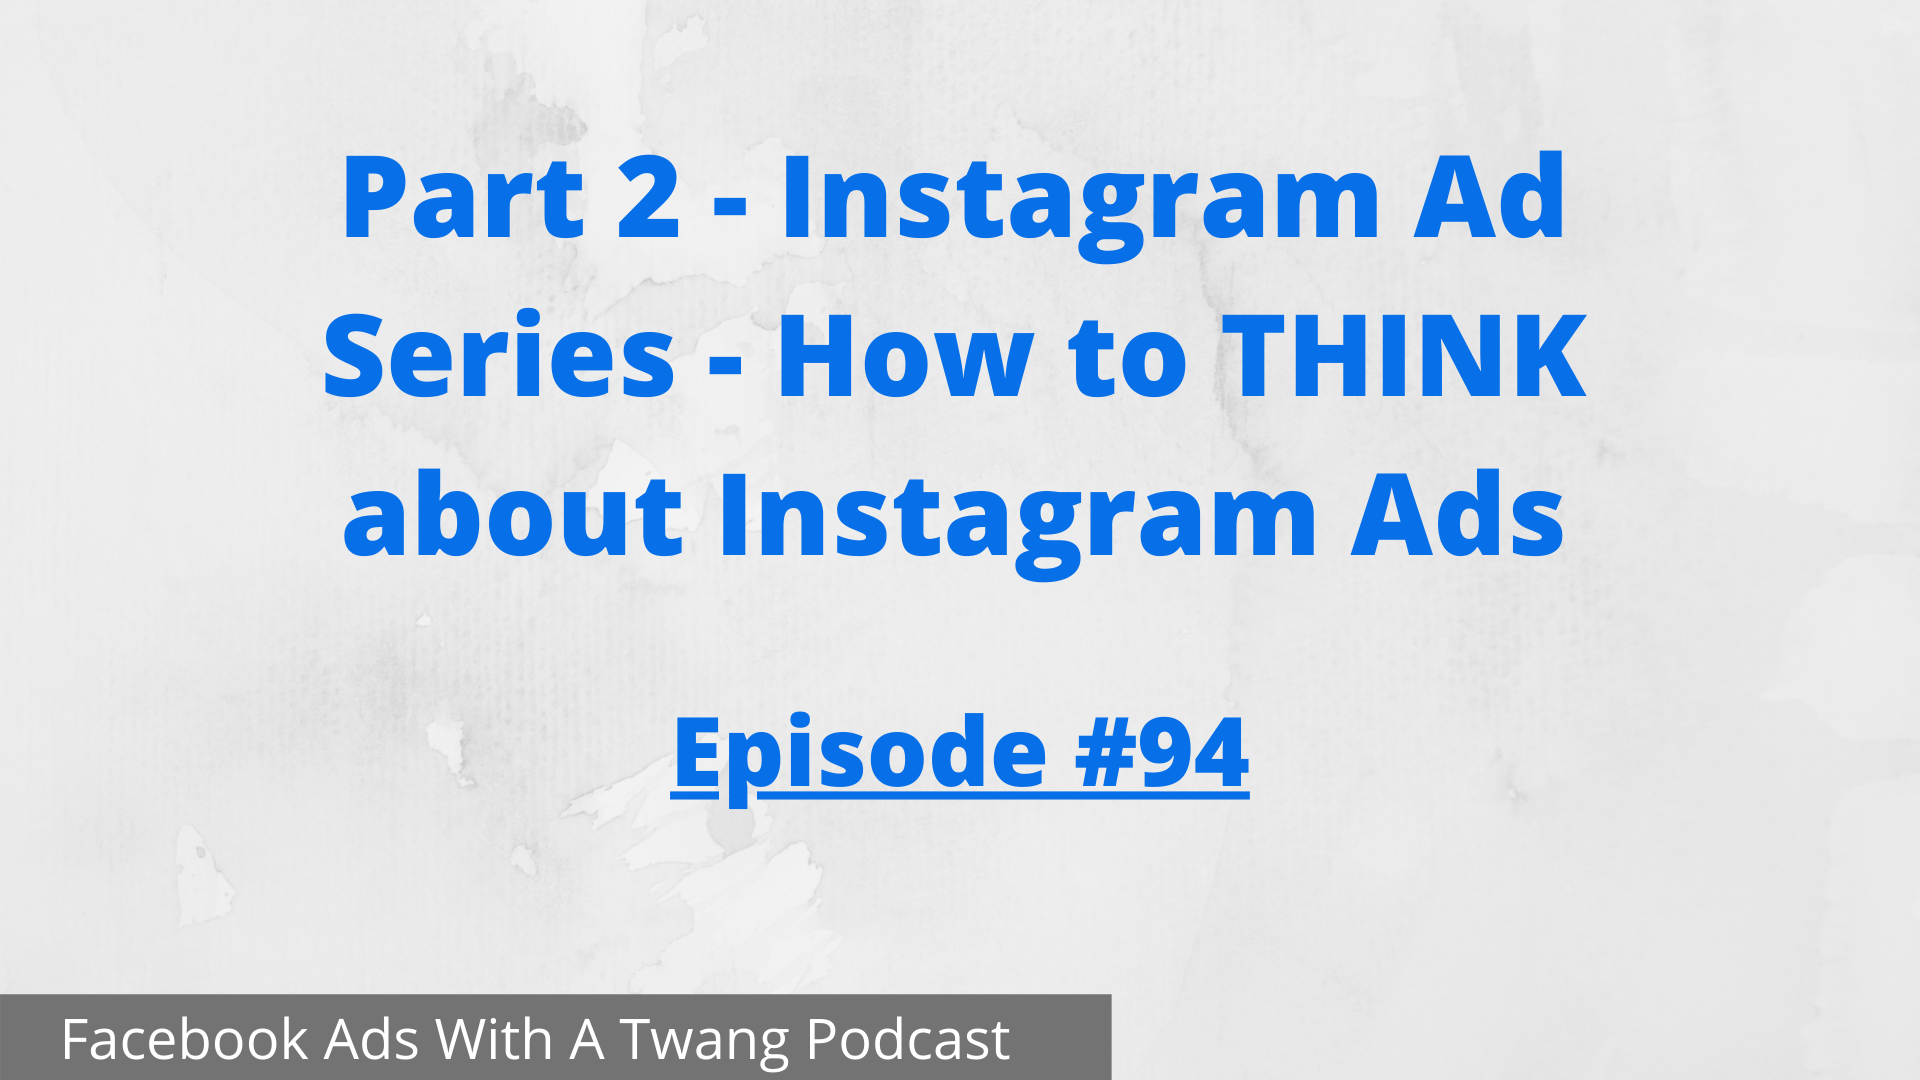 Part 2 - Instagram Ad Series - How to THINK about Instagram Ads